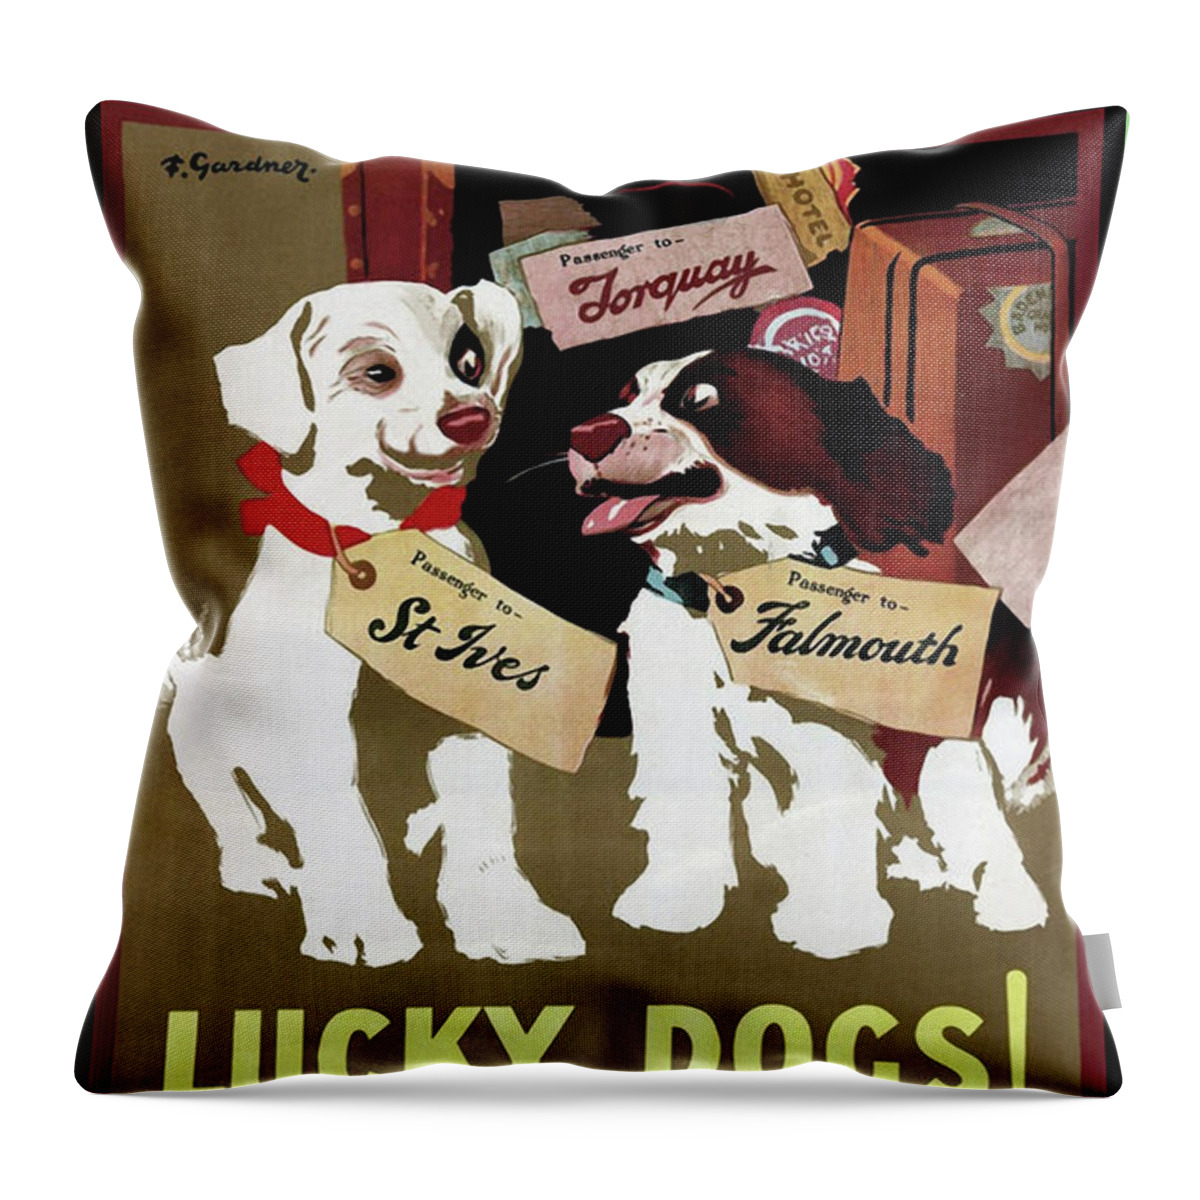 Vintage Poster Throw Pillow featuring the painting Vintage Traveling Dogs by Mindy Sommers